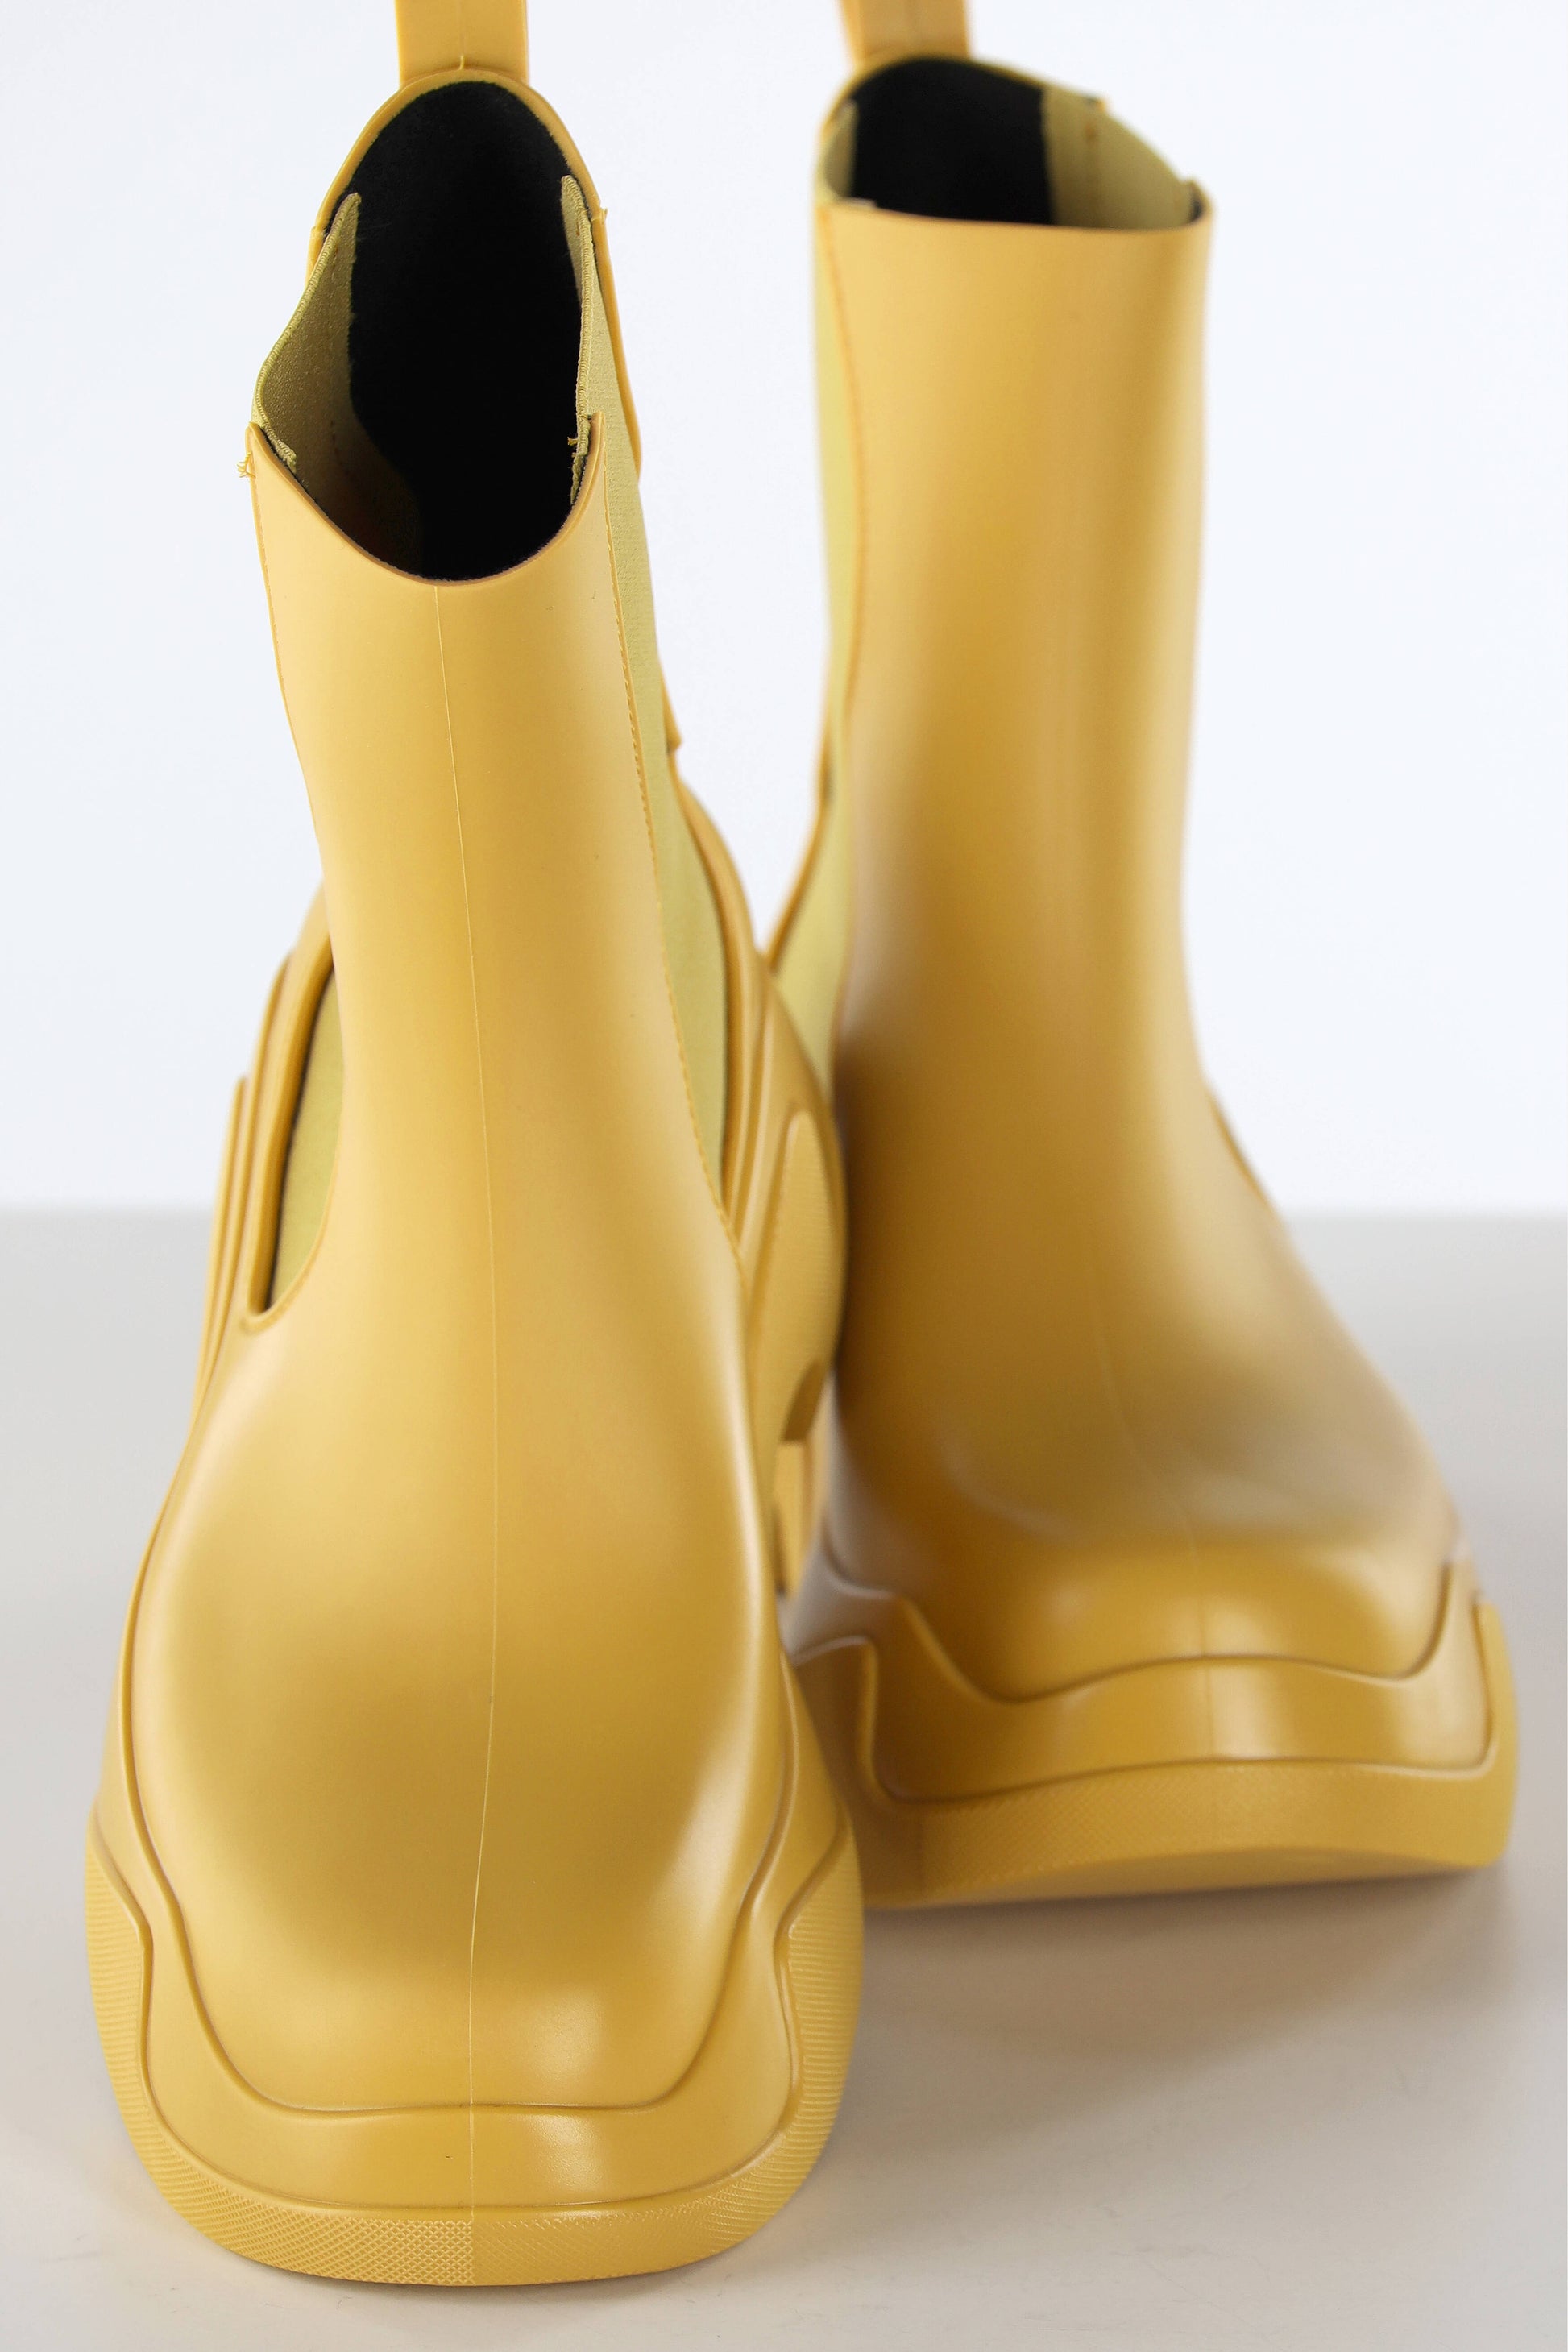 Boots PVC Recyclable in MustardXocoi - Anita Hass